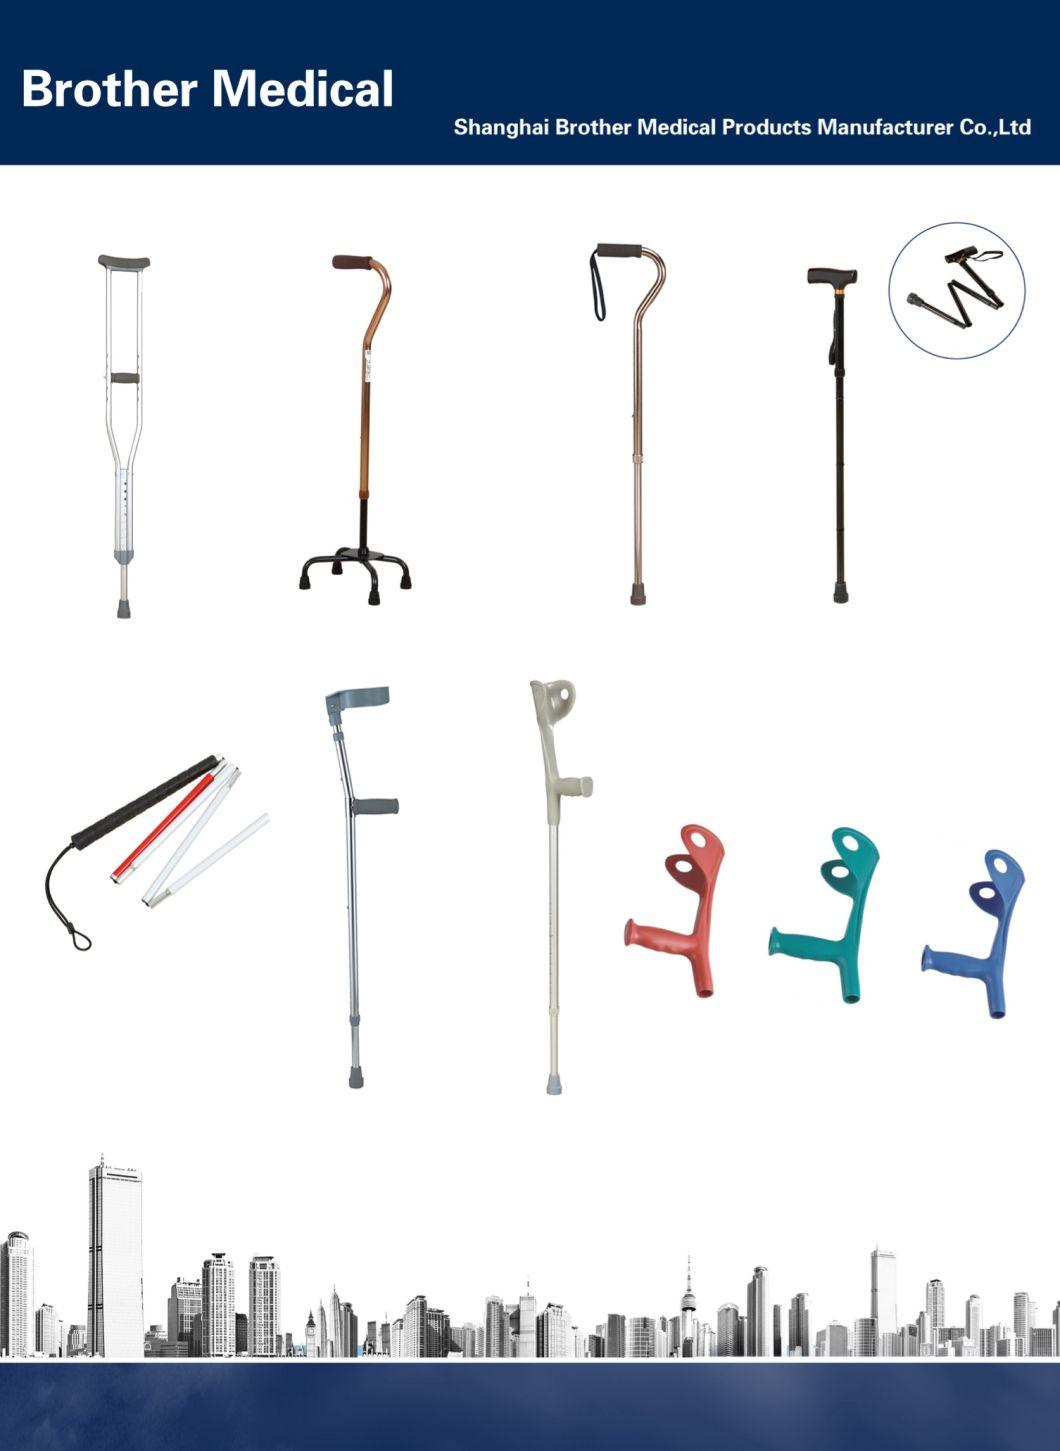 Underarm Walking Stick Crutches Elbow Canes for The Elderly